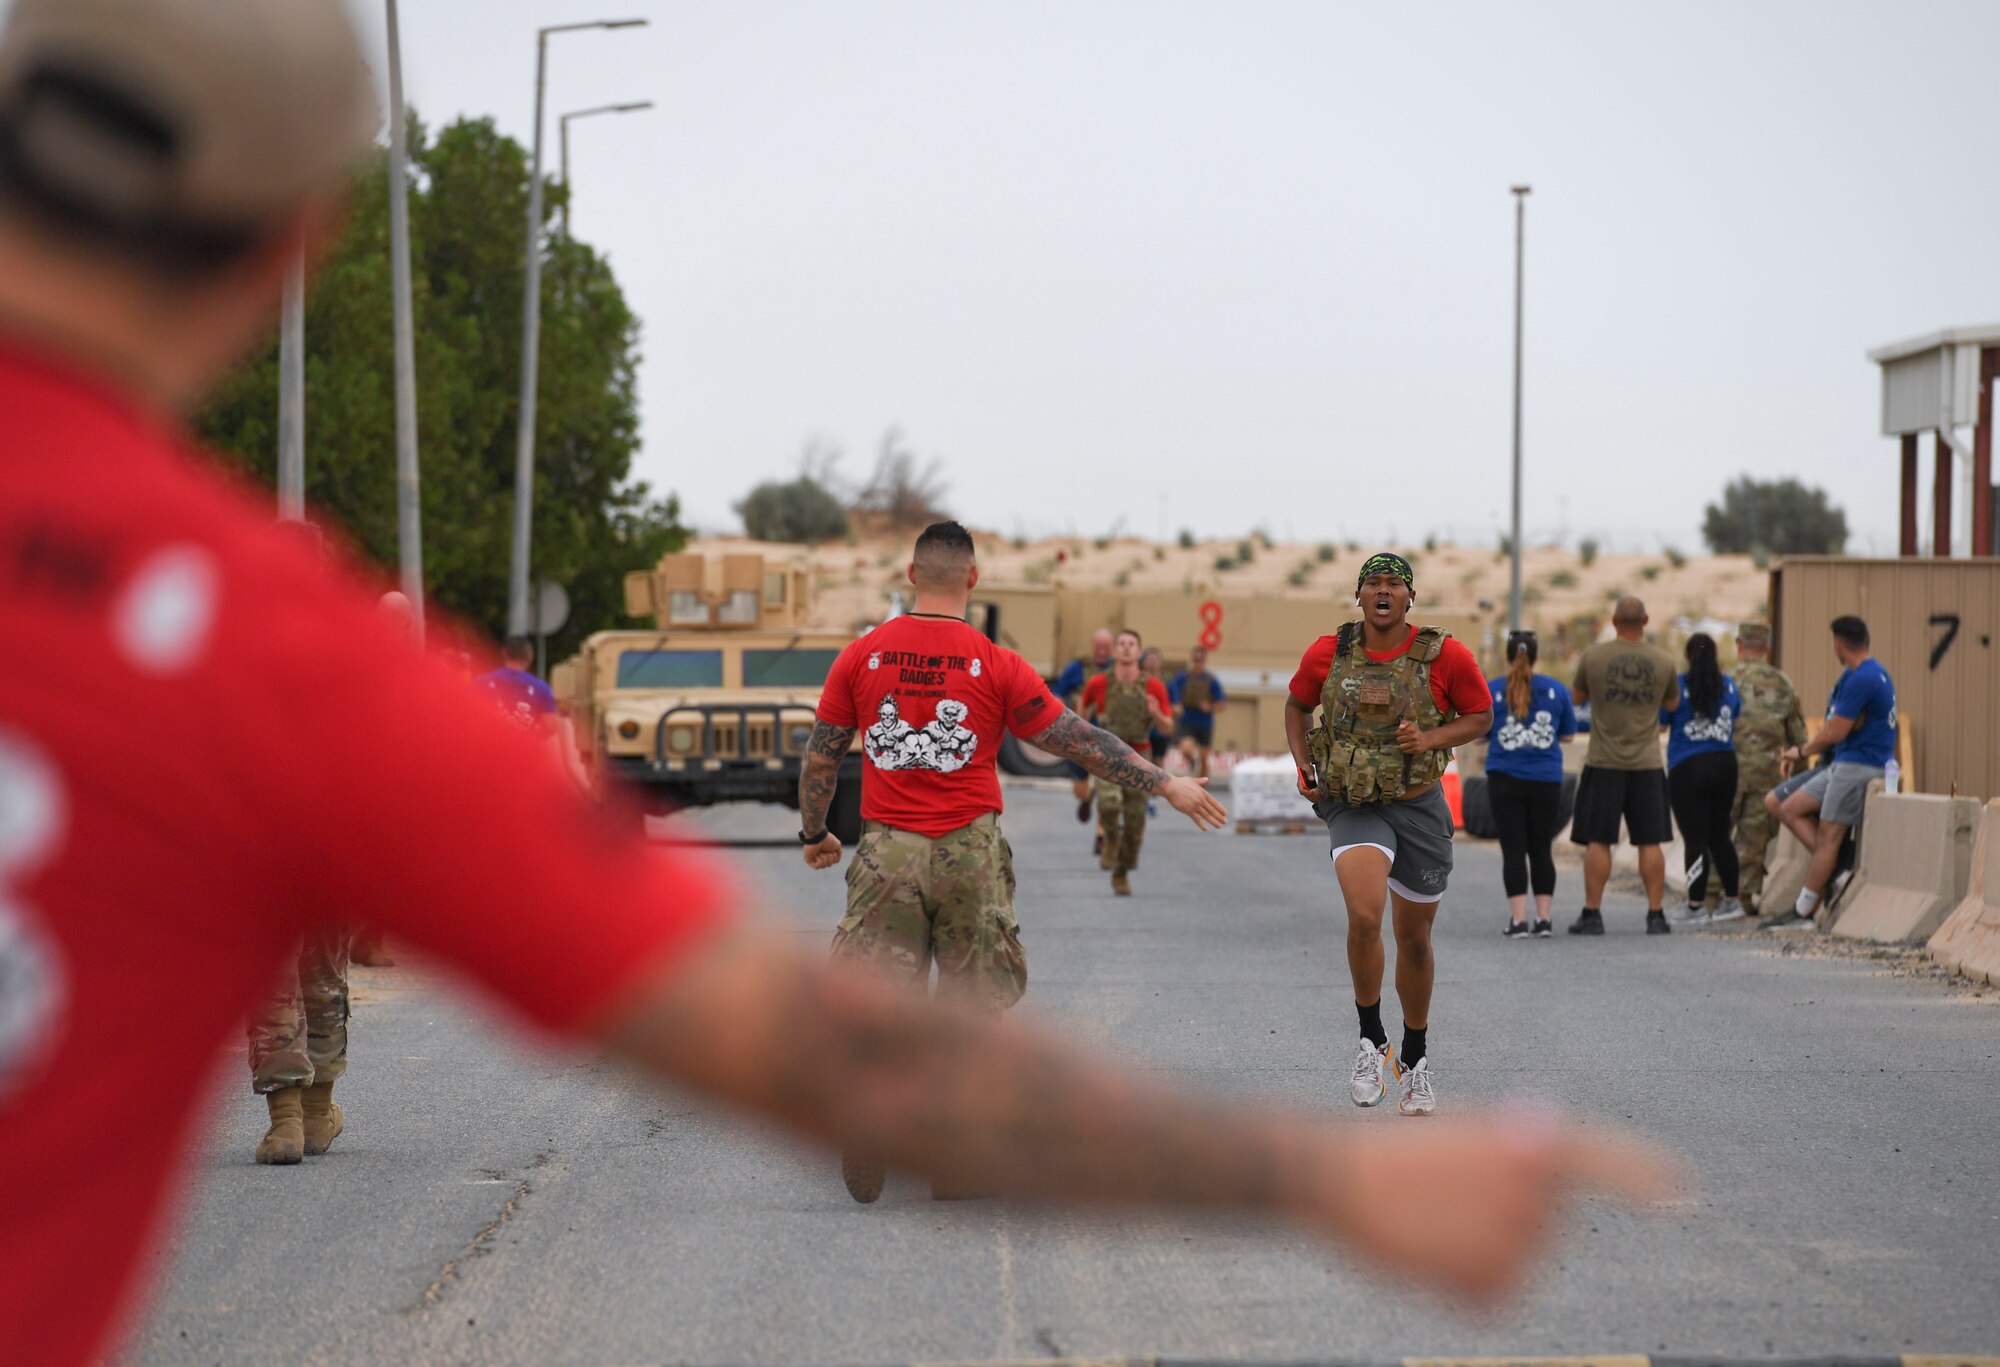 U.S. Air Force Senior Airman Donavan Shepard, 407th Expeditionary Civil Engineer Squadron fire protection specialist, runs toward the finish line during the Battle of the Badges event at Ahmed Al Jaber Air Base, Kuwait, Nov. 11, 2020.